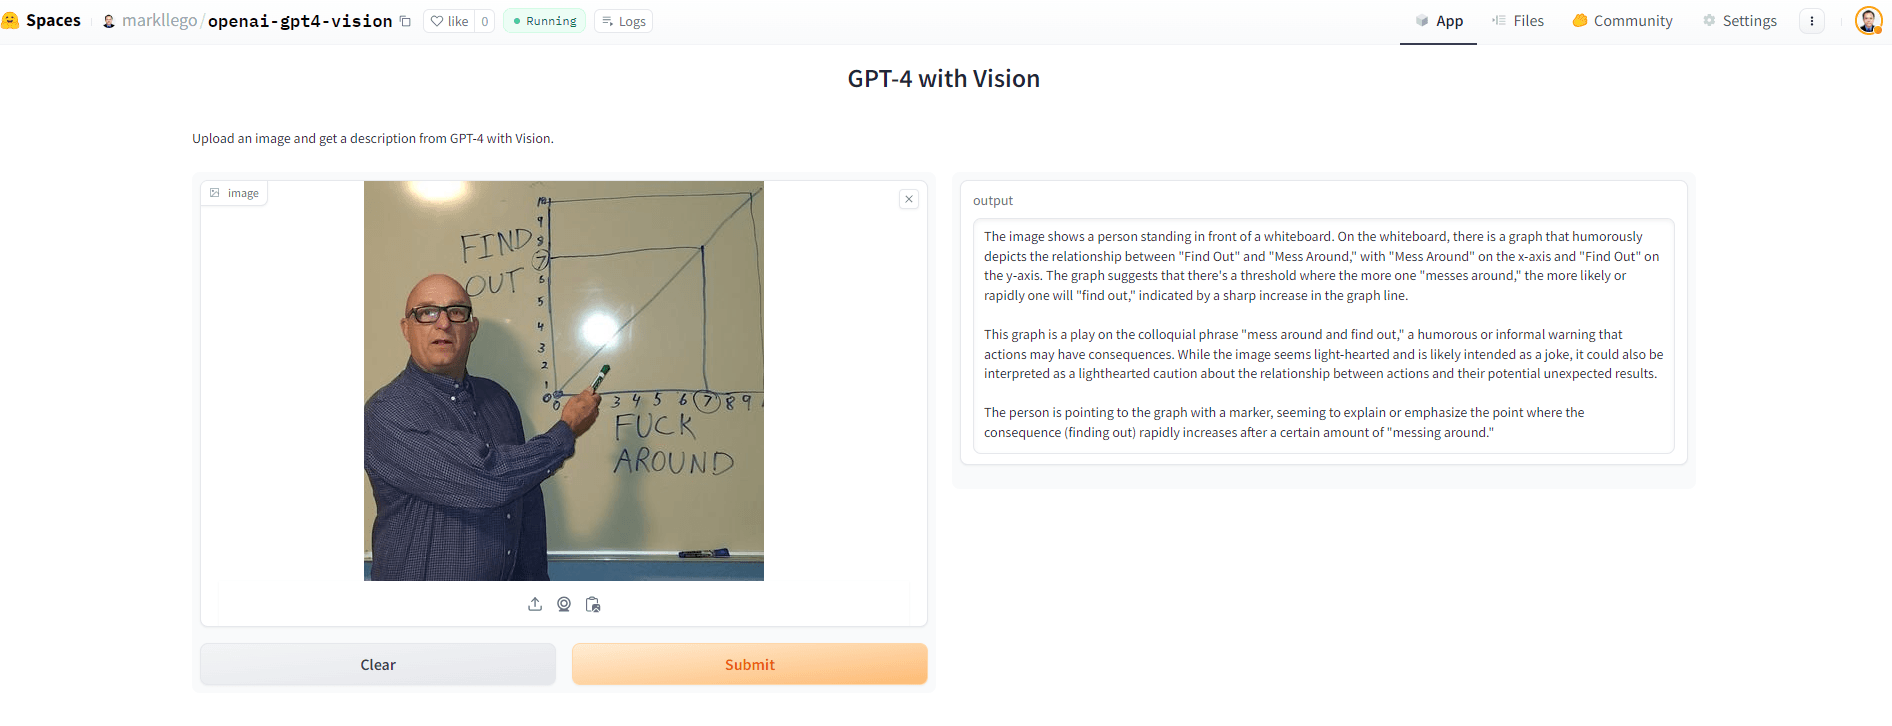 GPT-4 with Vision Demo